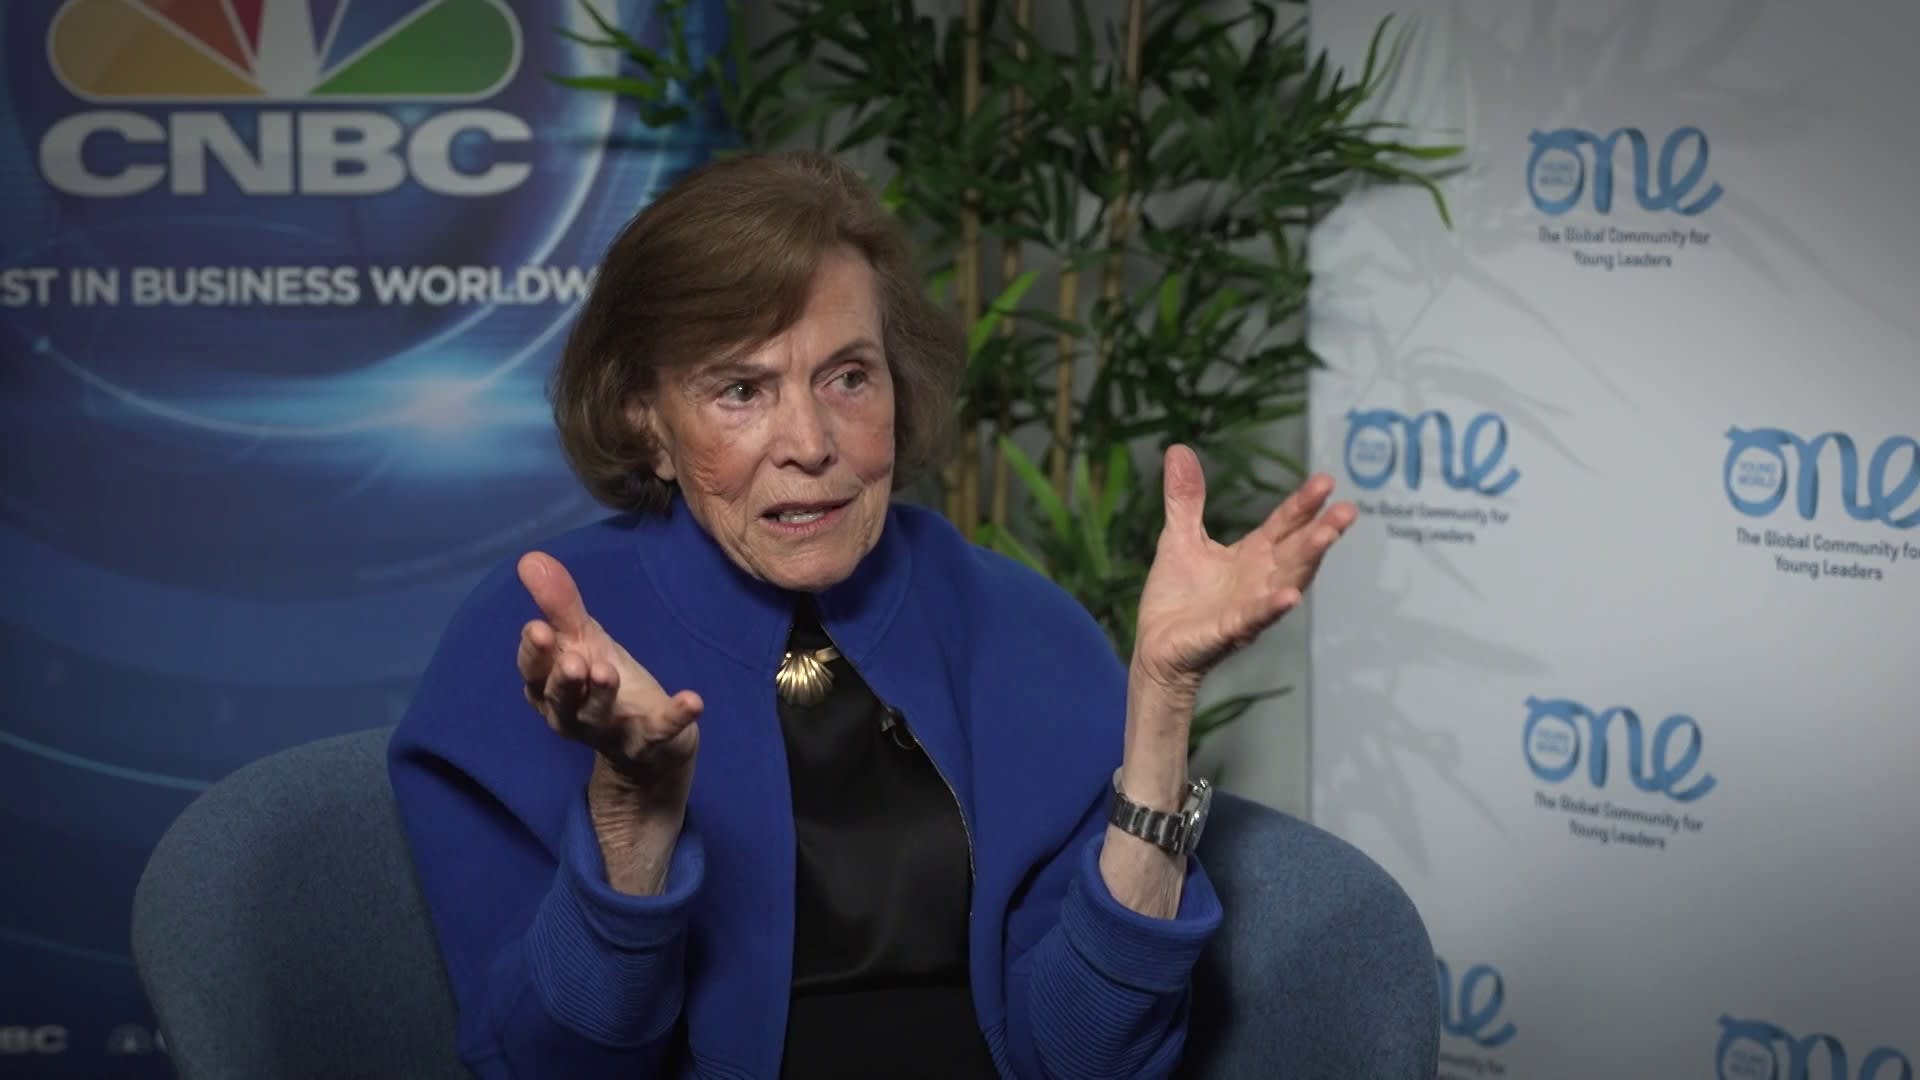 'The reality is Earth is in serious trouble': Sylvia Earle on oceans in crisis